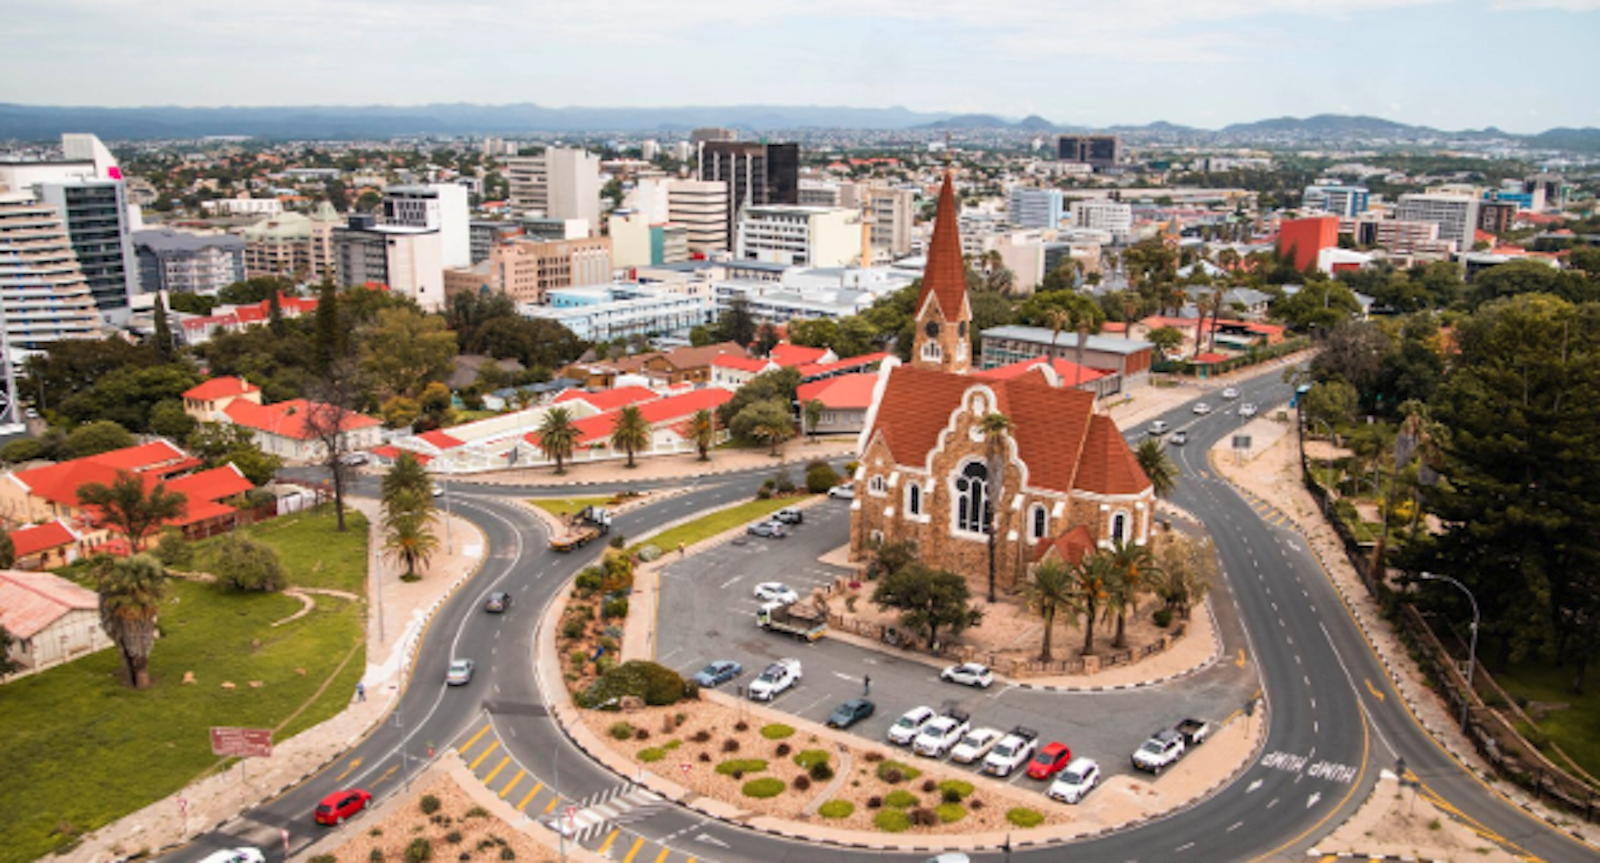 Photorealistic landscape image of Windhoek, Namibia, showcasing iconic landmarks like Christ Church, Independence Memorial Museum, and the Supreme Court of Namibia with a futuristic touch. The cityscape includes modern and colonial architecture, futuristic buildings, autonomous vehicles, and drones, set against rolling hills and desert landscape under a golden sunset.